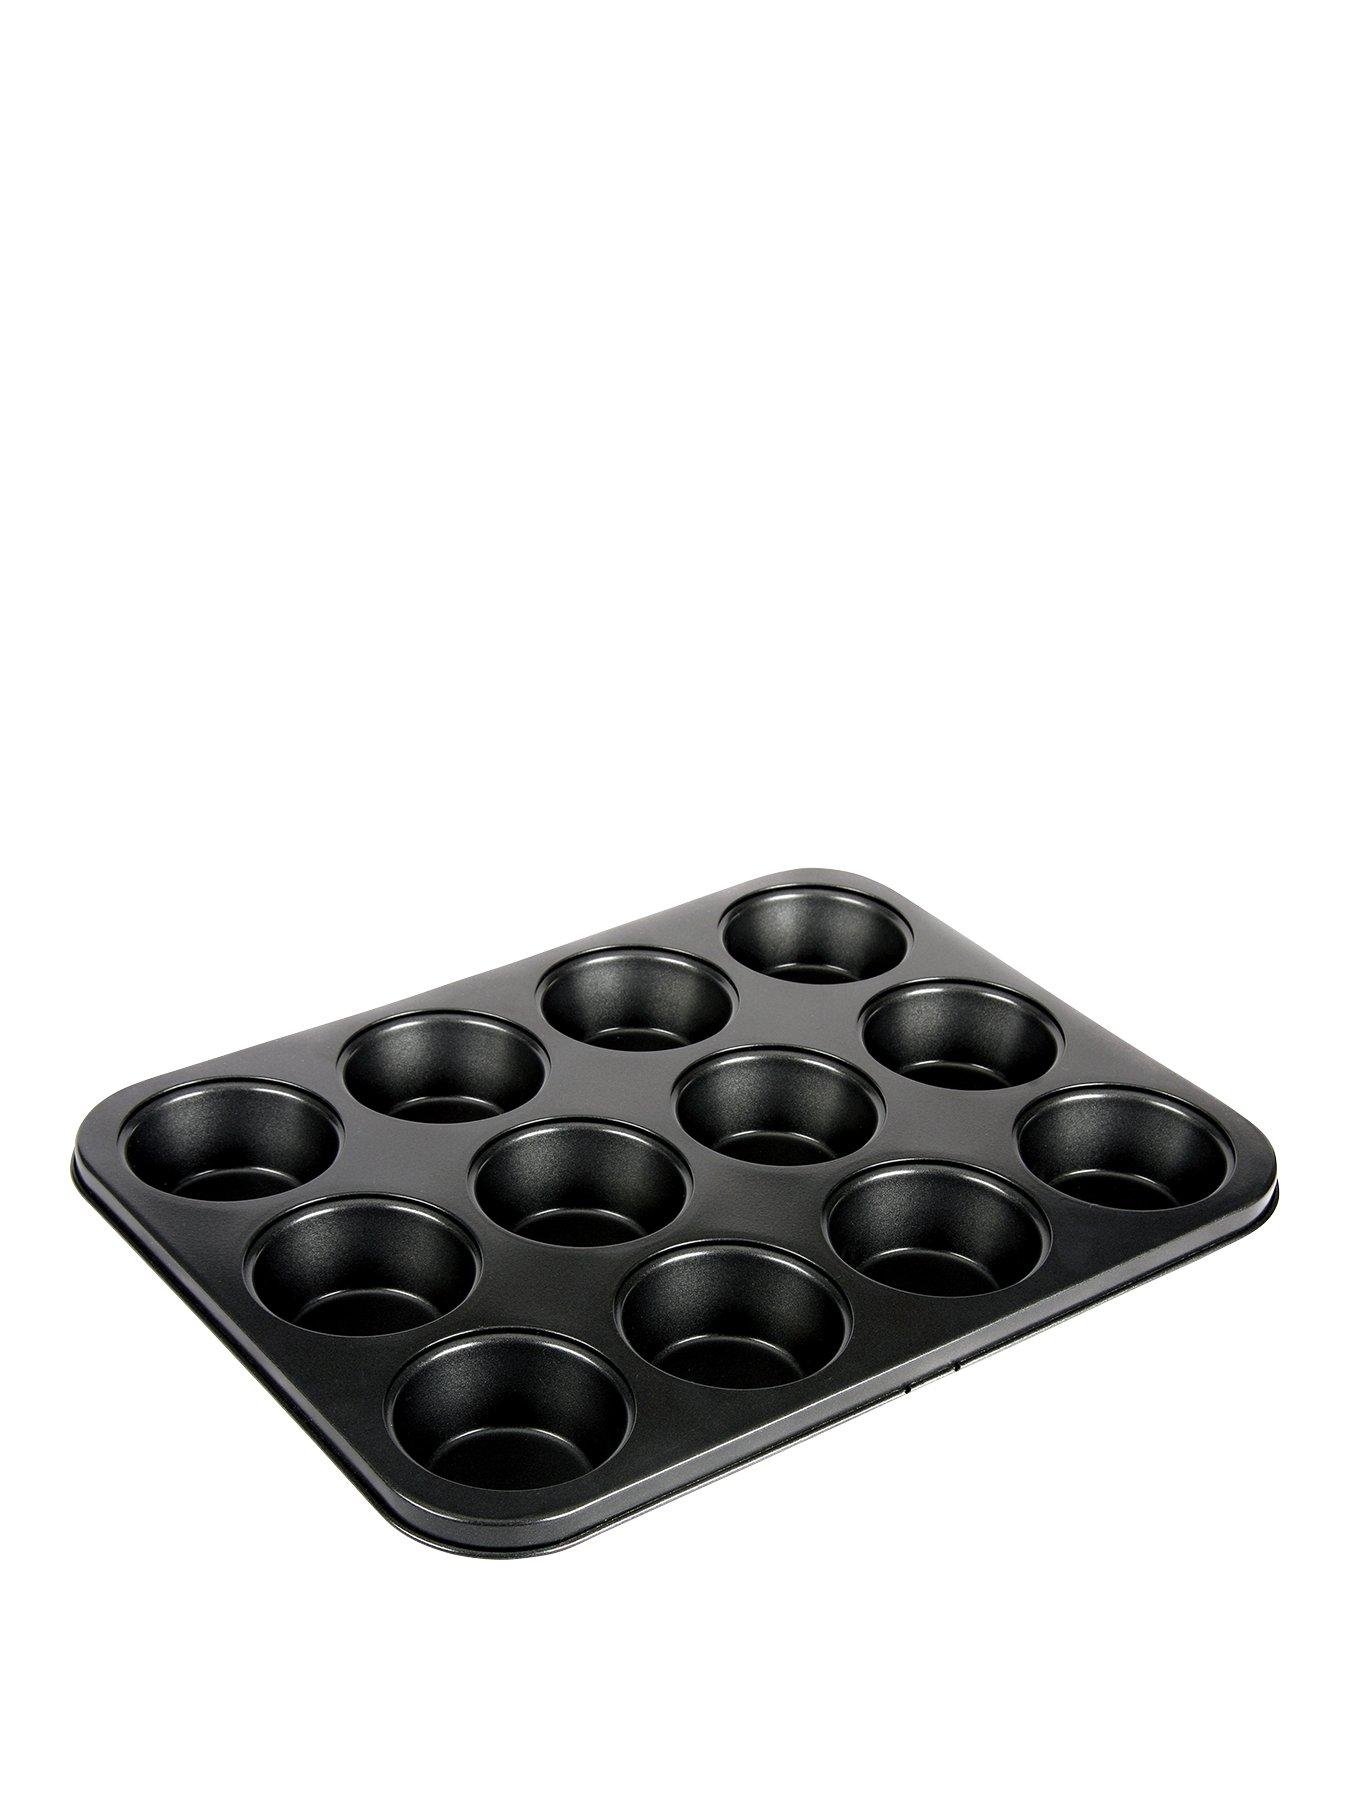 Details about   6 12 24 Deep Cup Muffin Fairy Cake Baking Non Stick Steel Tray Tin Pan Bakeware 